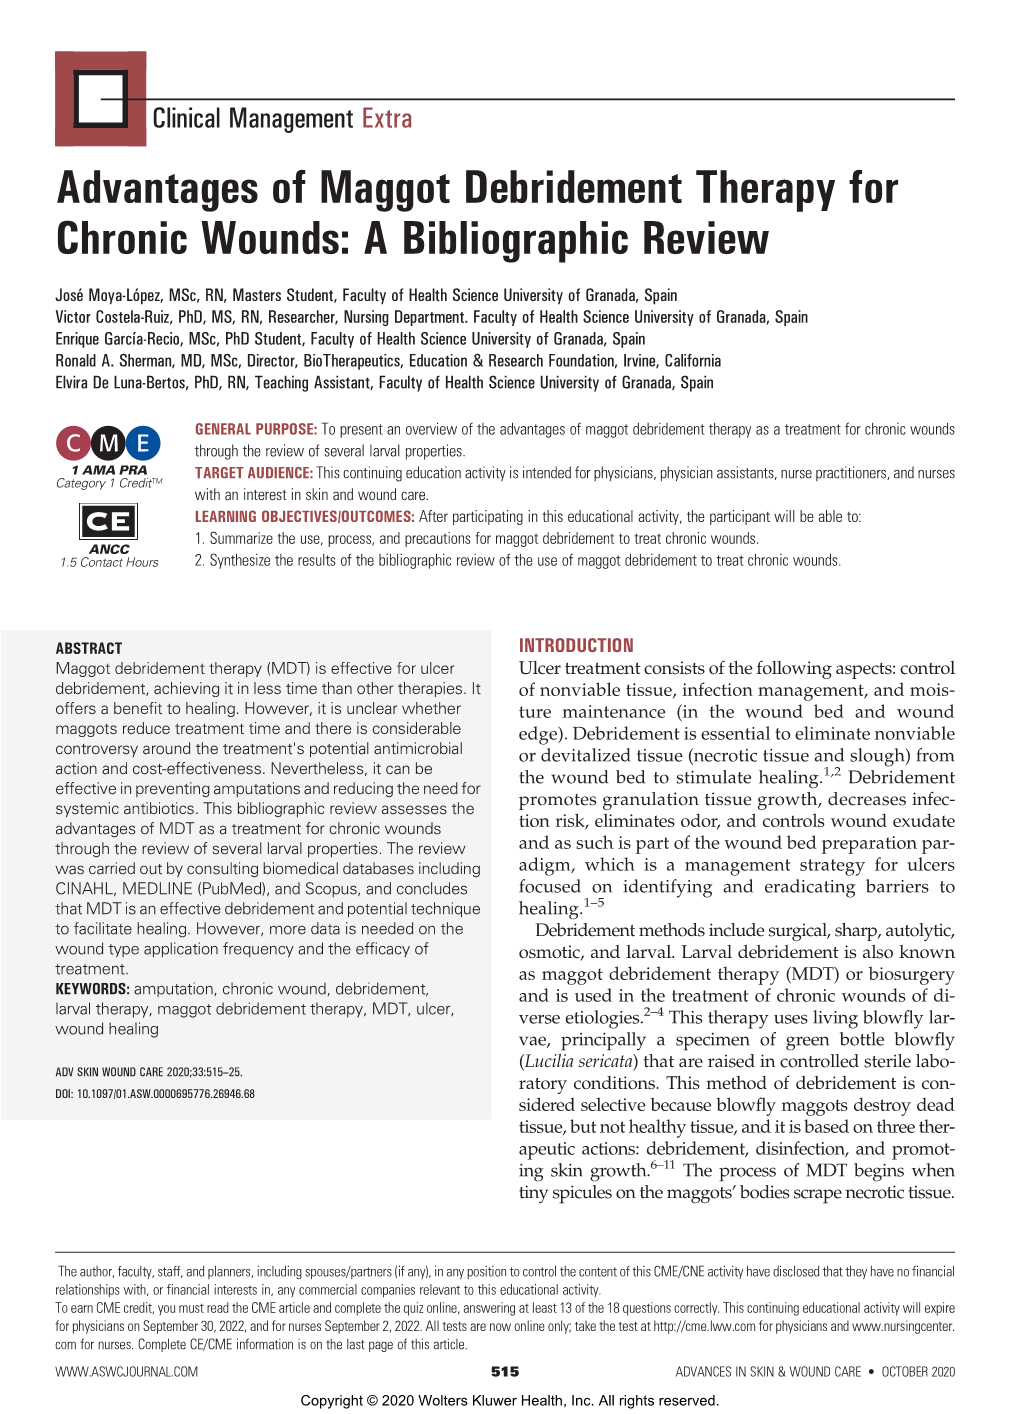 Advantages of Maggot Debridement Therapy for Chronic Wounds: a Bibliographic Review